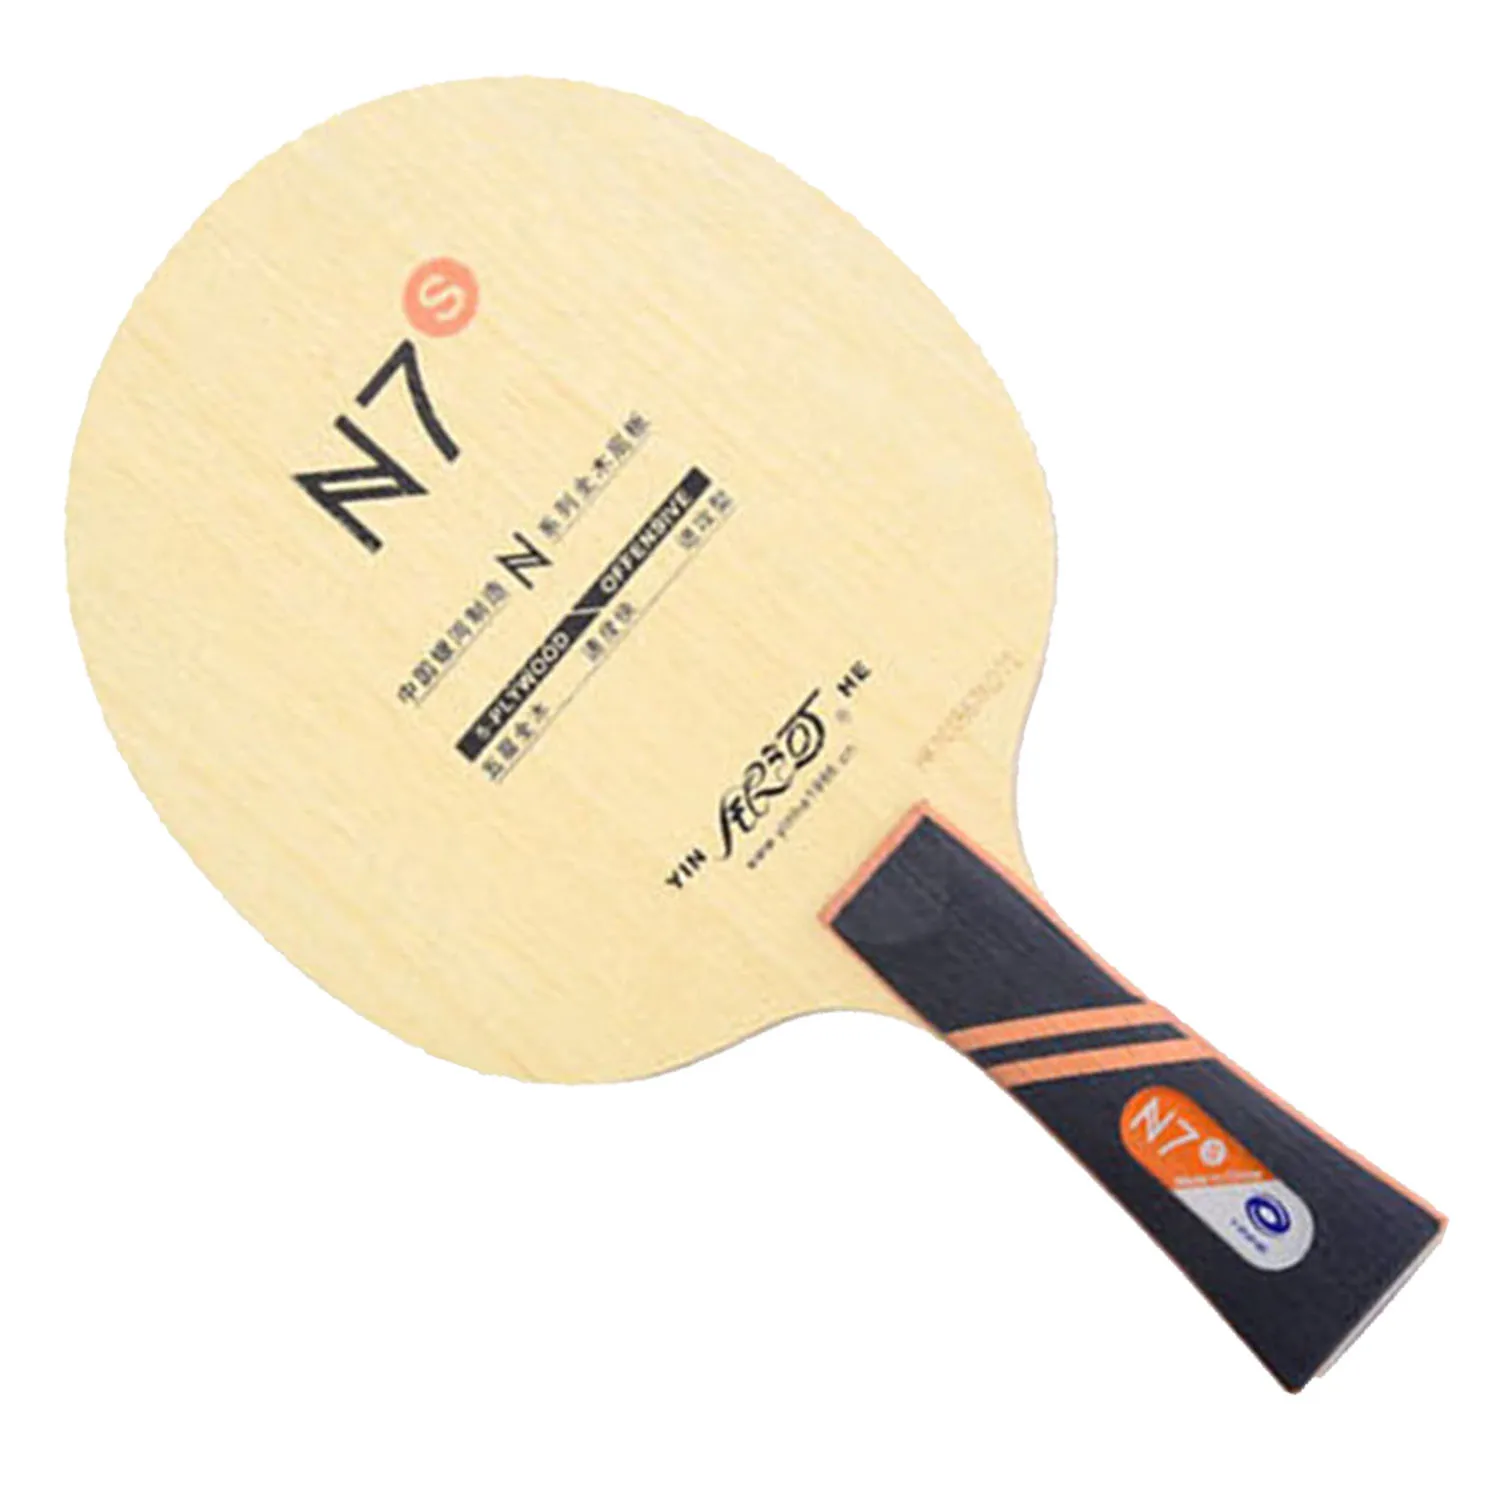 

Original Yinhe N-7S N7 S pure wood N-7S professional table tennis blade for beginner table tennis rackets racquet sports indoor